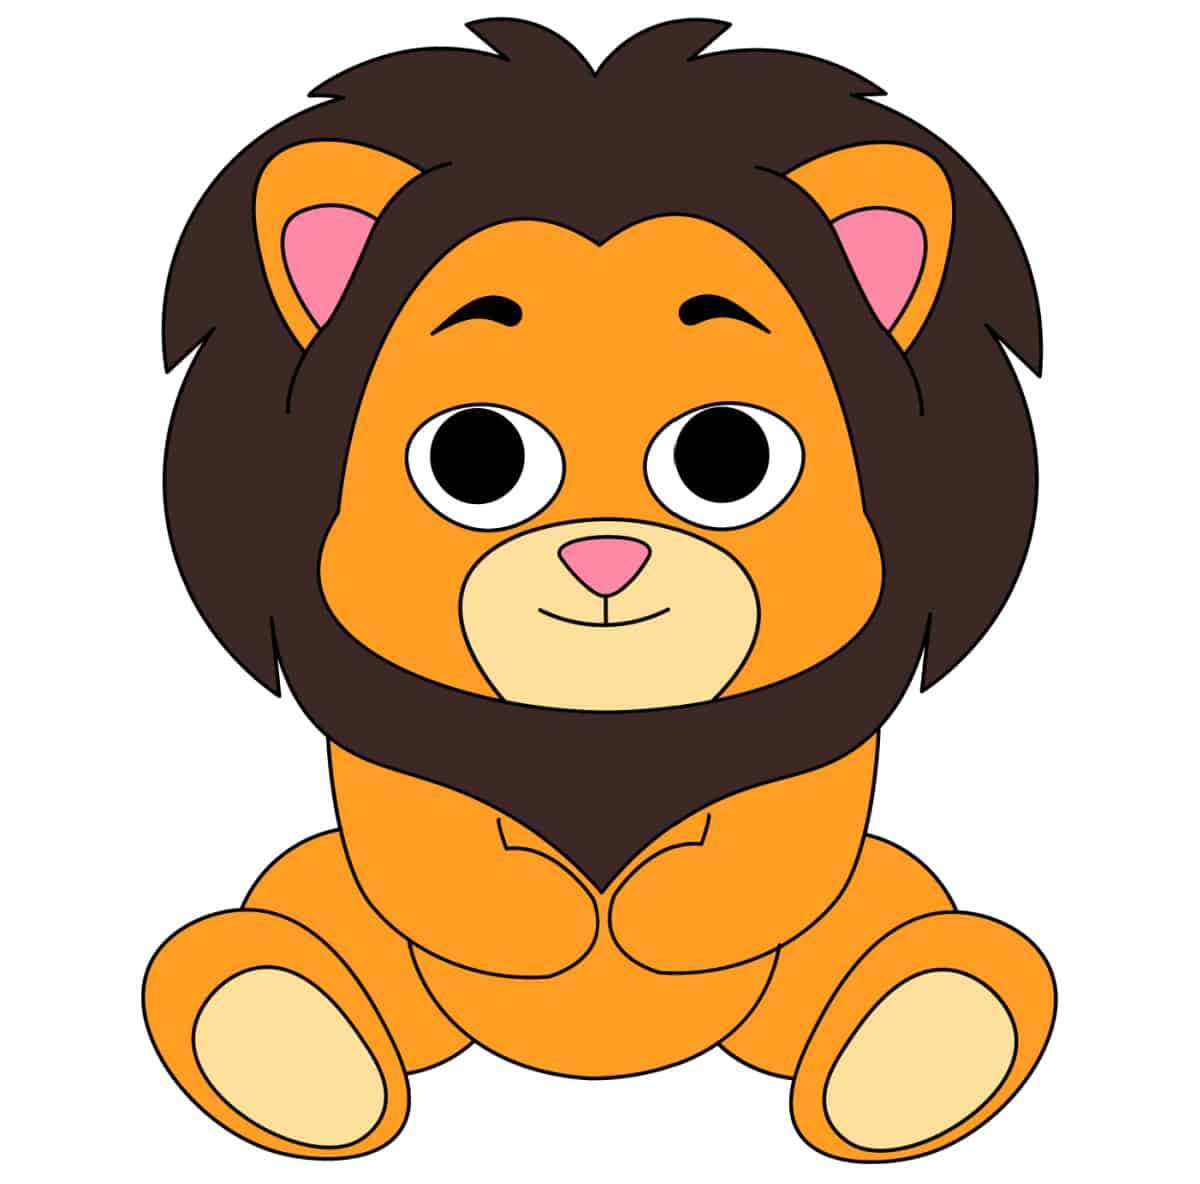 lion. Nature. Drawings. Pictures. Drawings ideas for kids. Easy and simple.